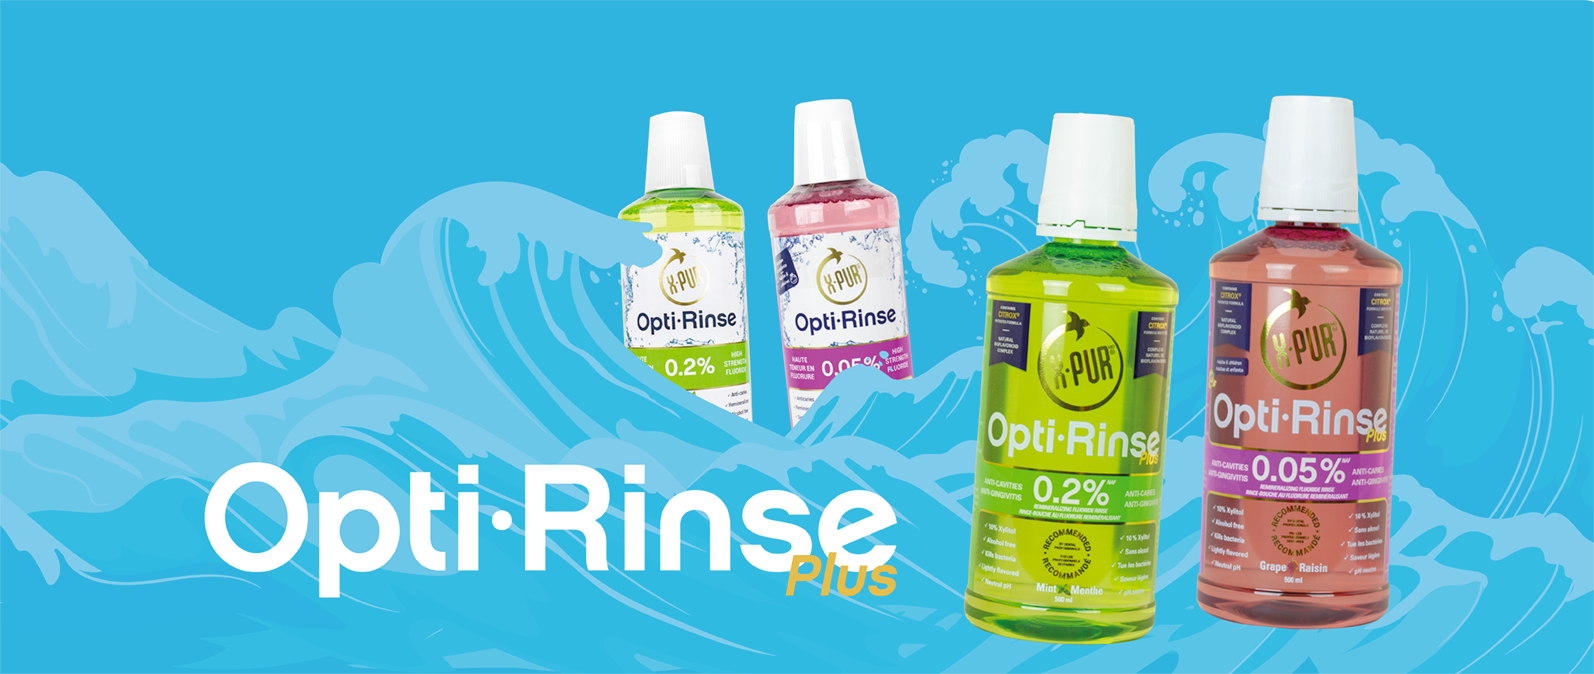 Fluoridated Mouthwash Without Alcohol Opti-Rinse 0.05% – Oral Science  Boutique